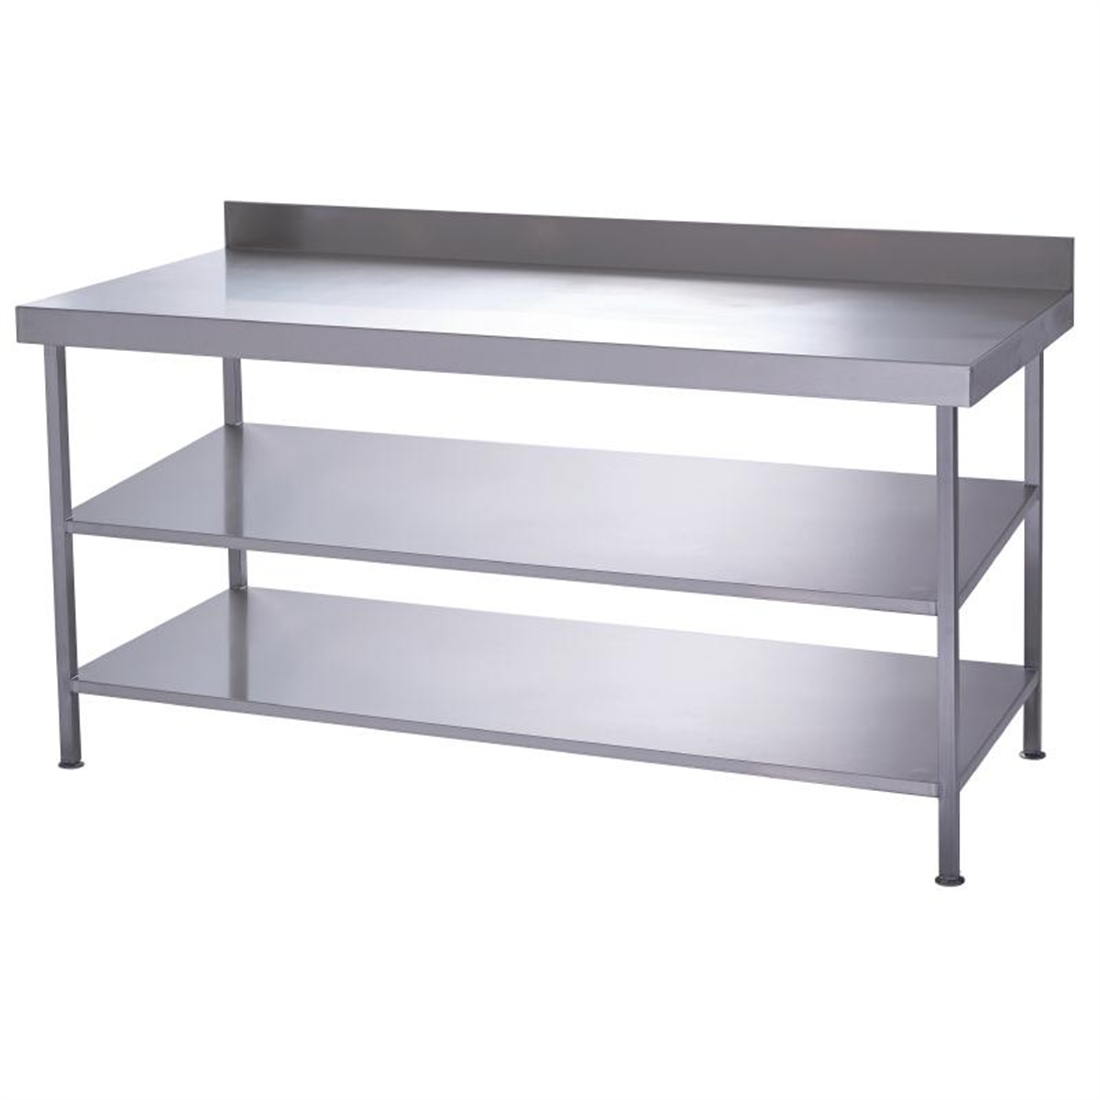 Parry Fully Welded Stainless Steel Wall Table 2 Undershelves 1800x600mm